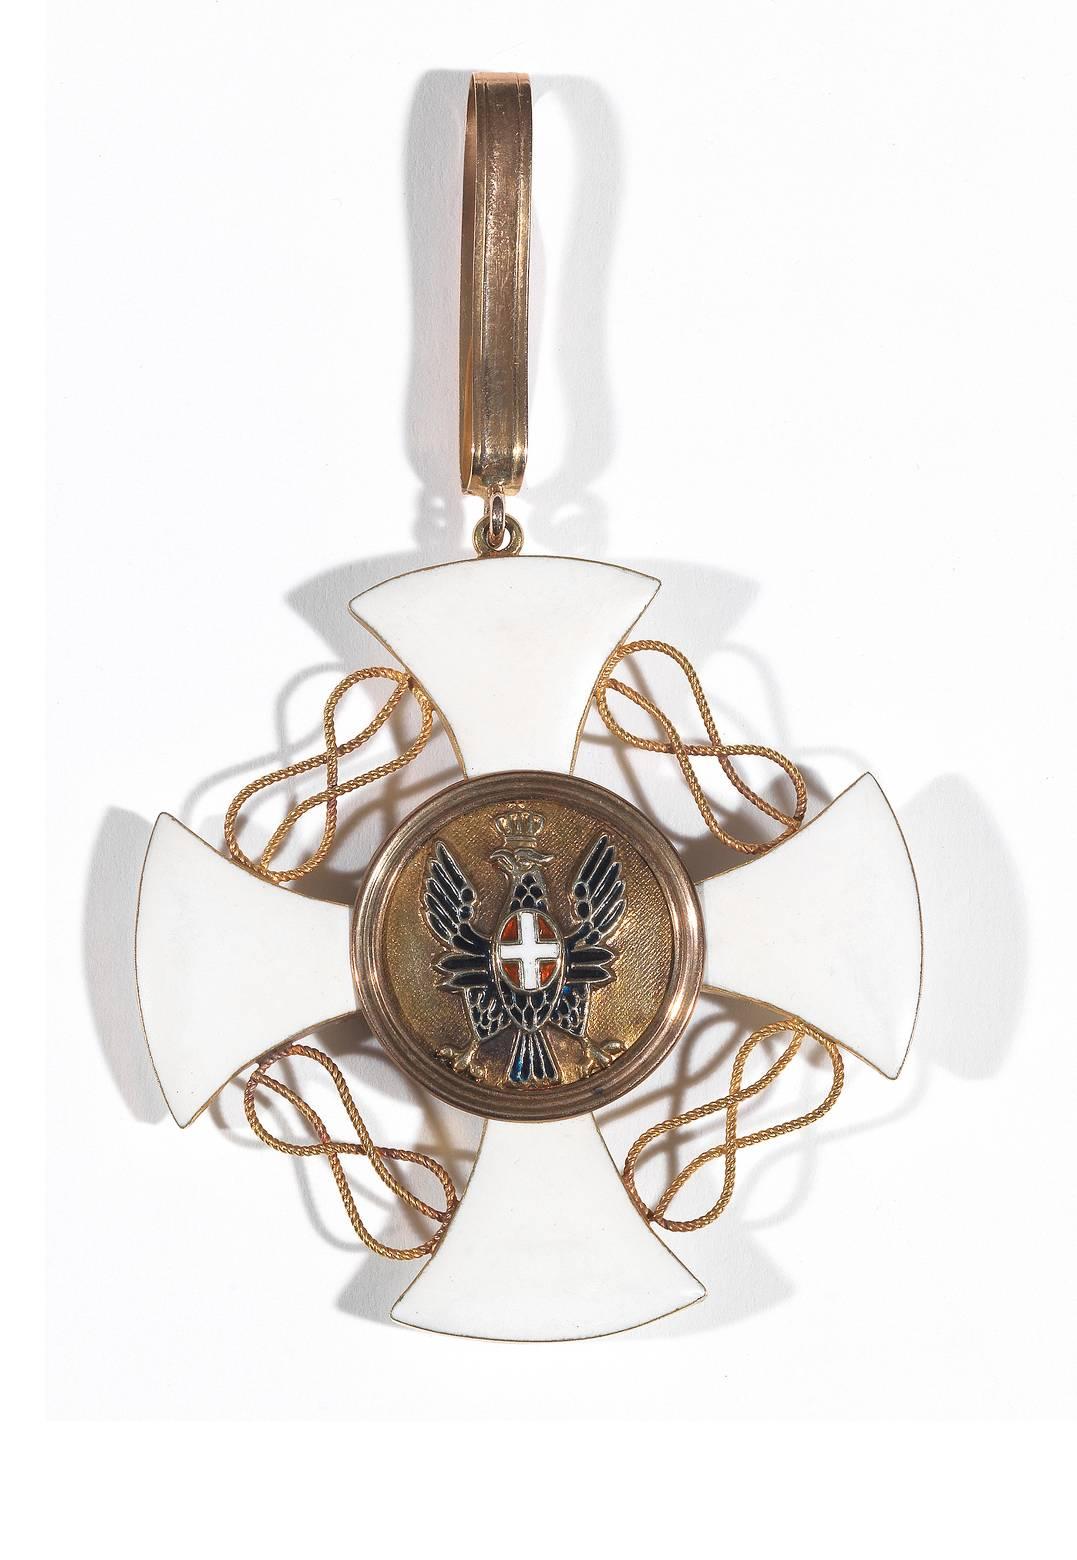 

The cross with curved edges, enamelled in white, with the so-called Savoy knots between the arms of the cross. The front central disc featured the Iron Crown of Lombardy on a blue enamel background. The back central disc with a black-enameled